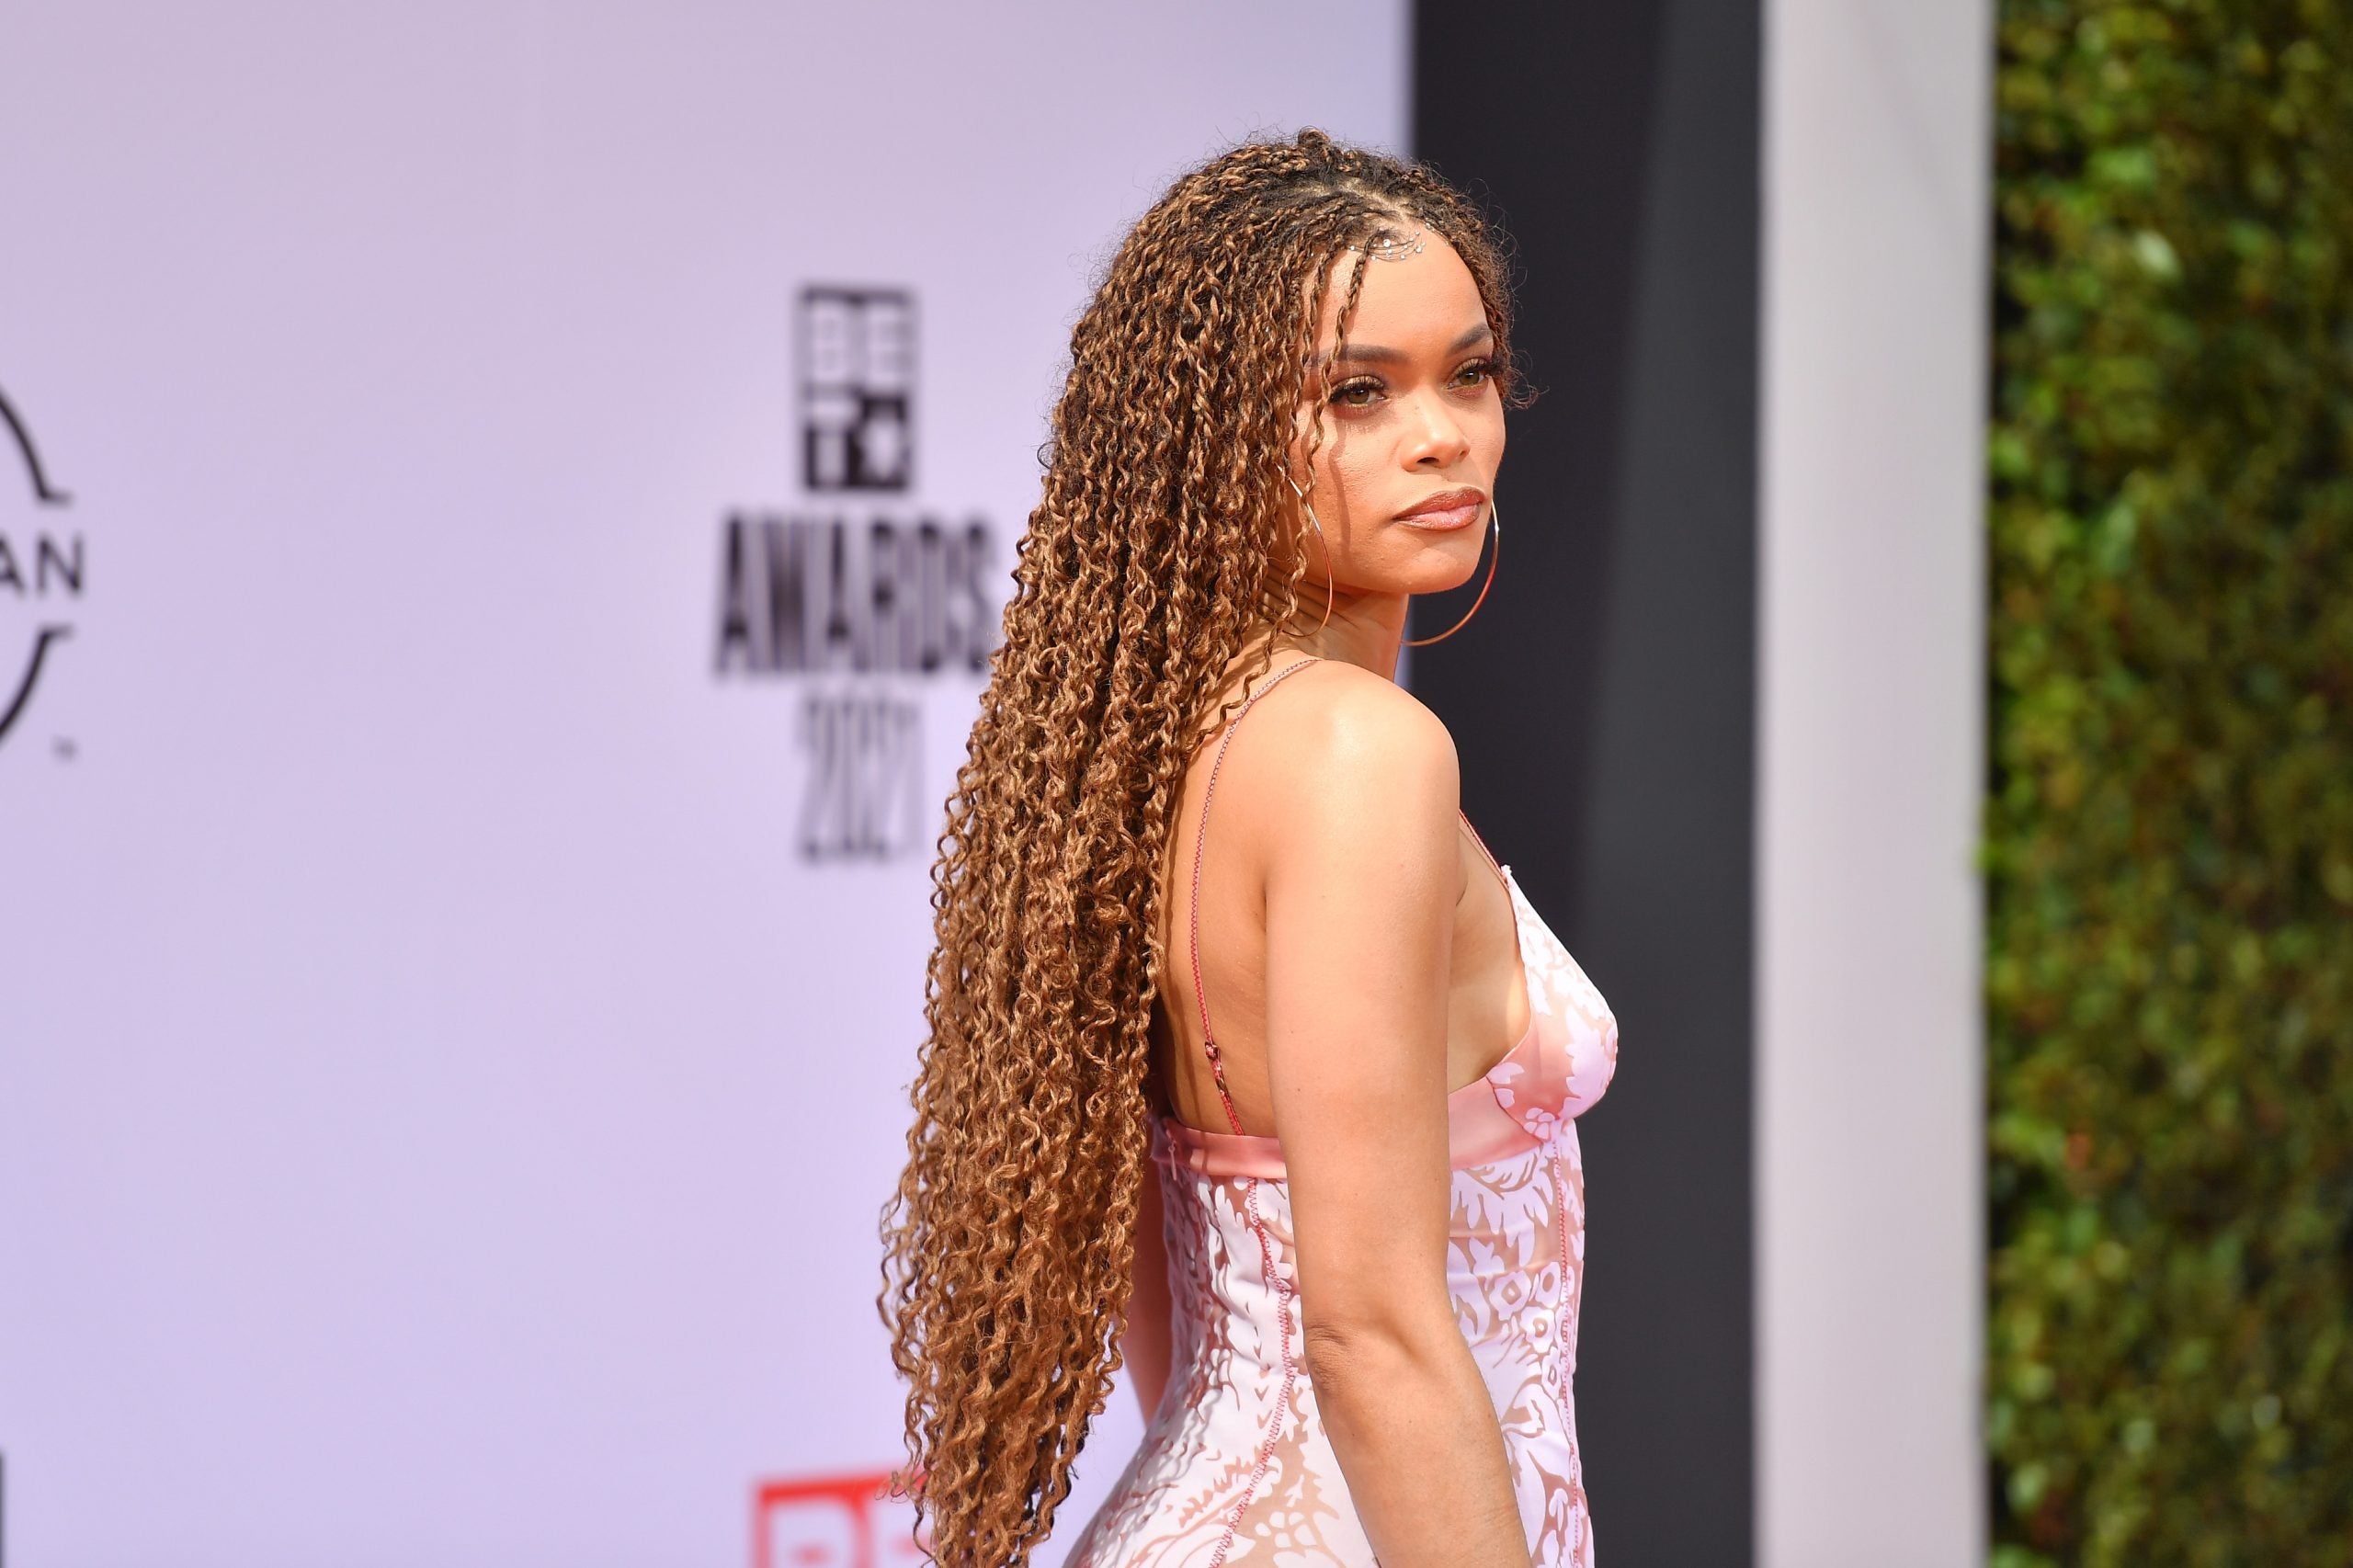 Every Winner From The 2021 BET Awards